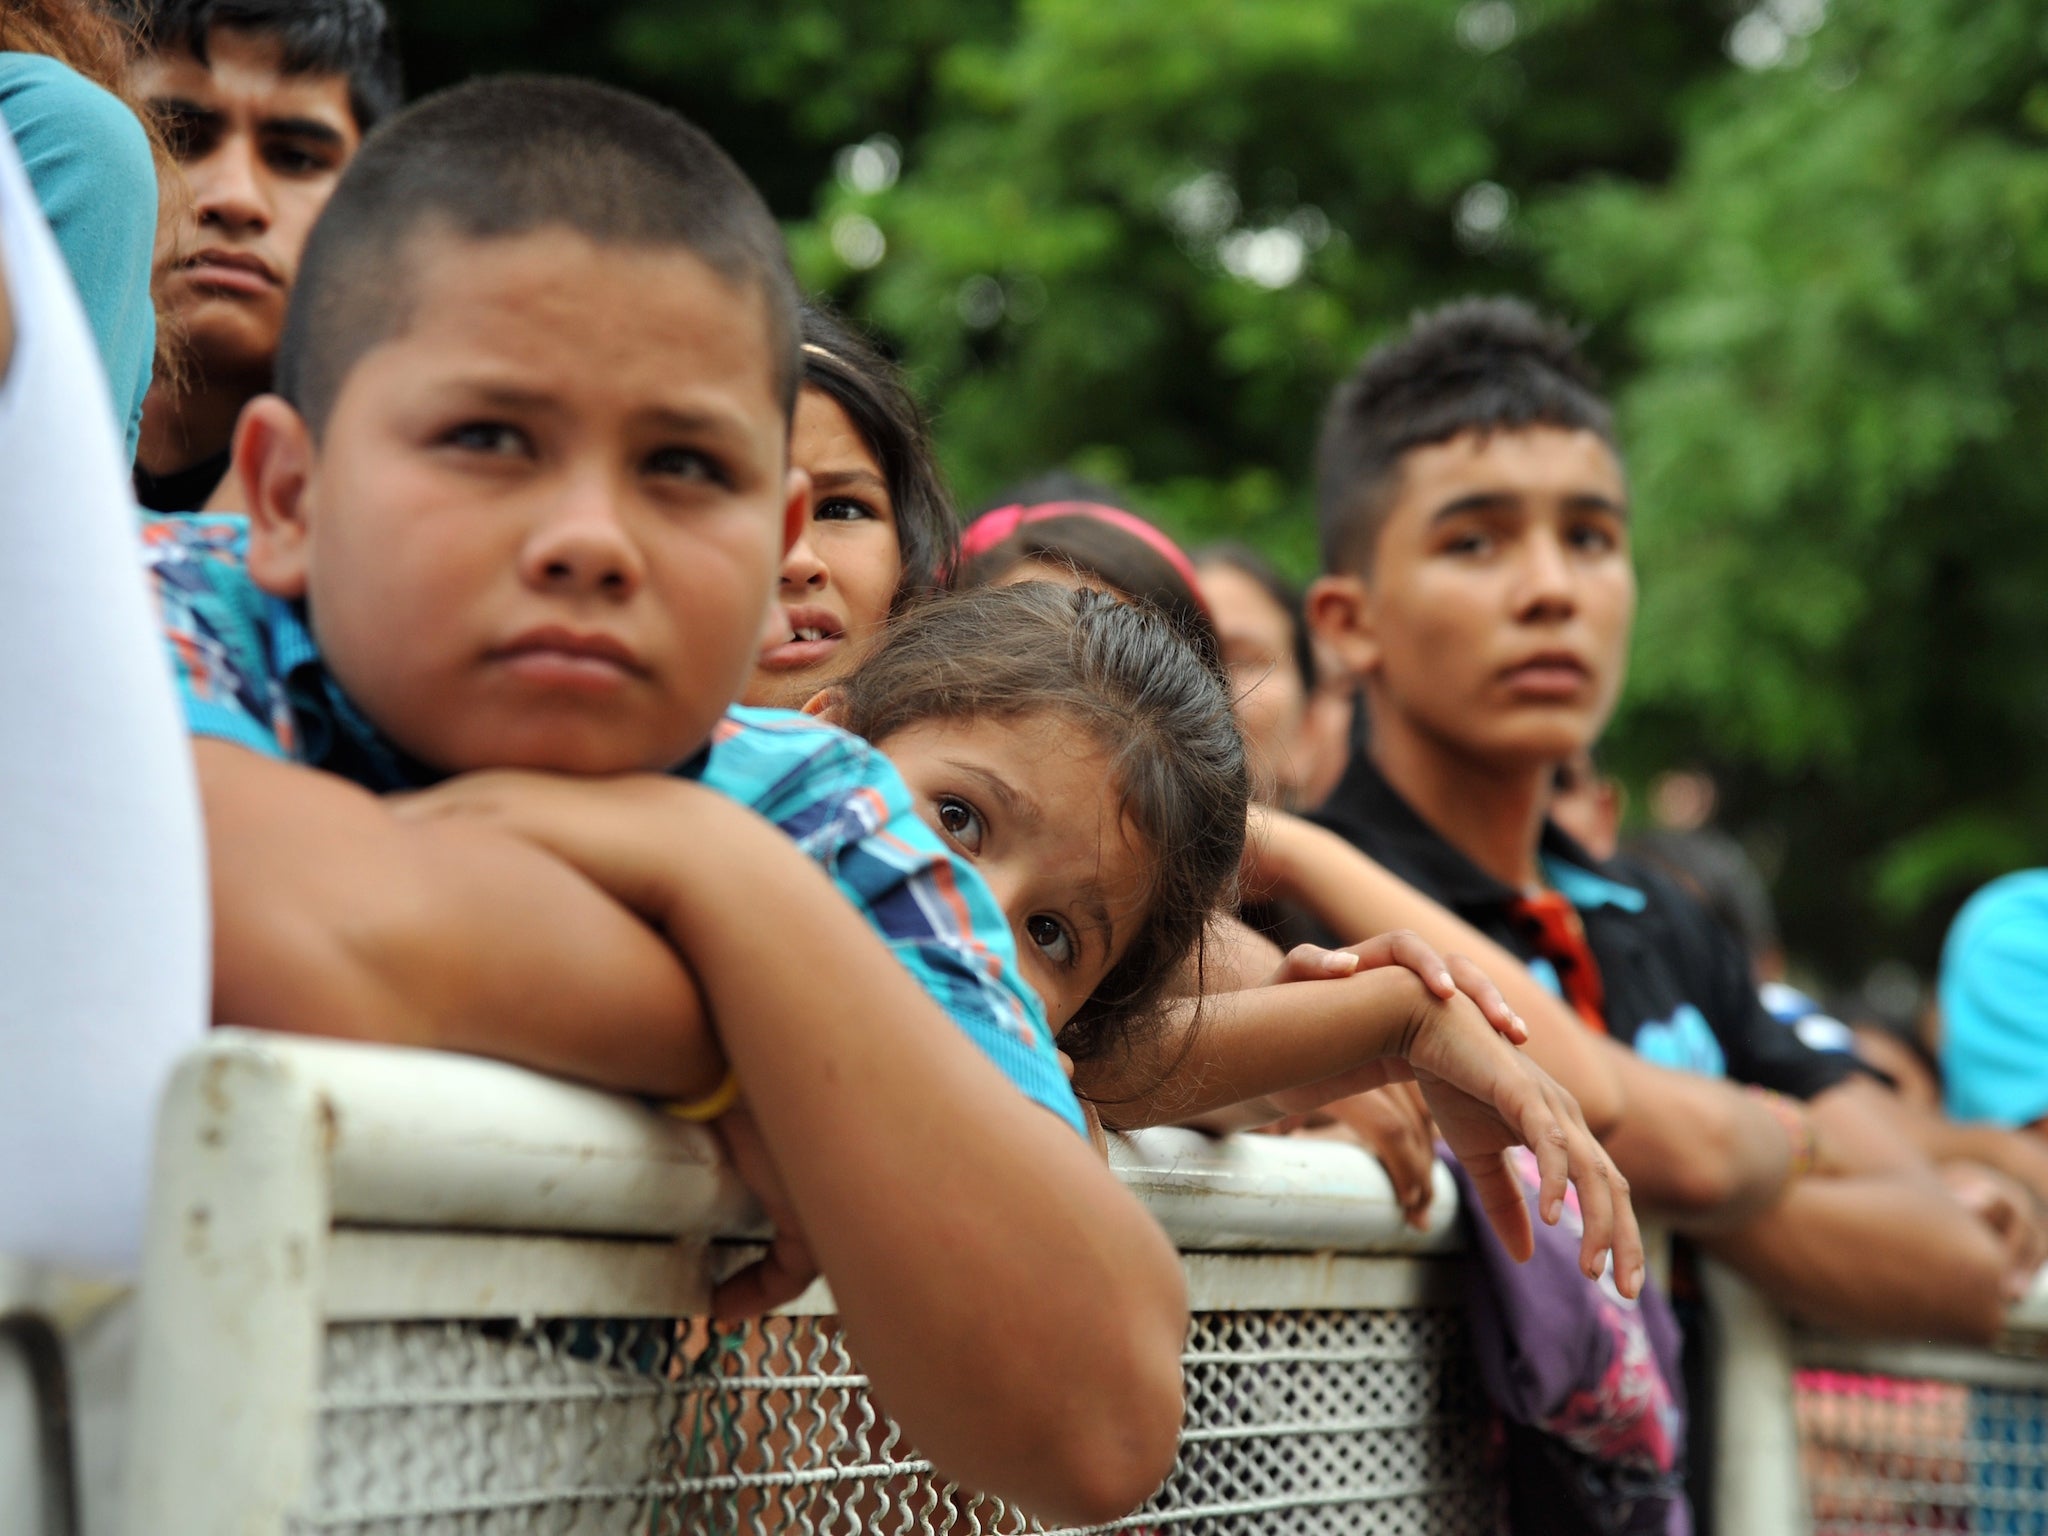 FARC says it is to stop the recruitment of children